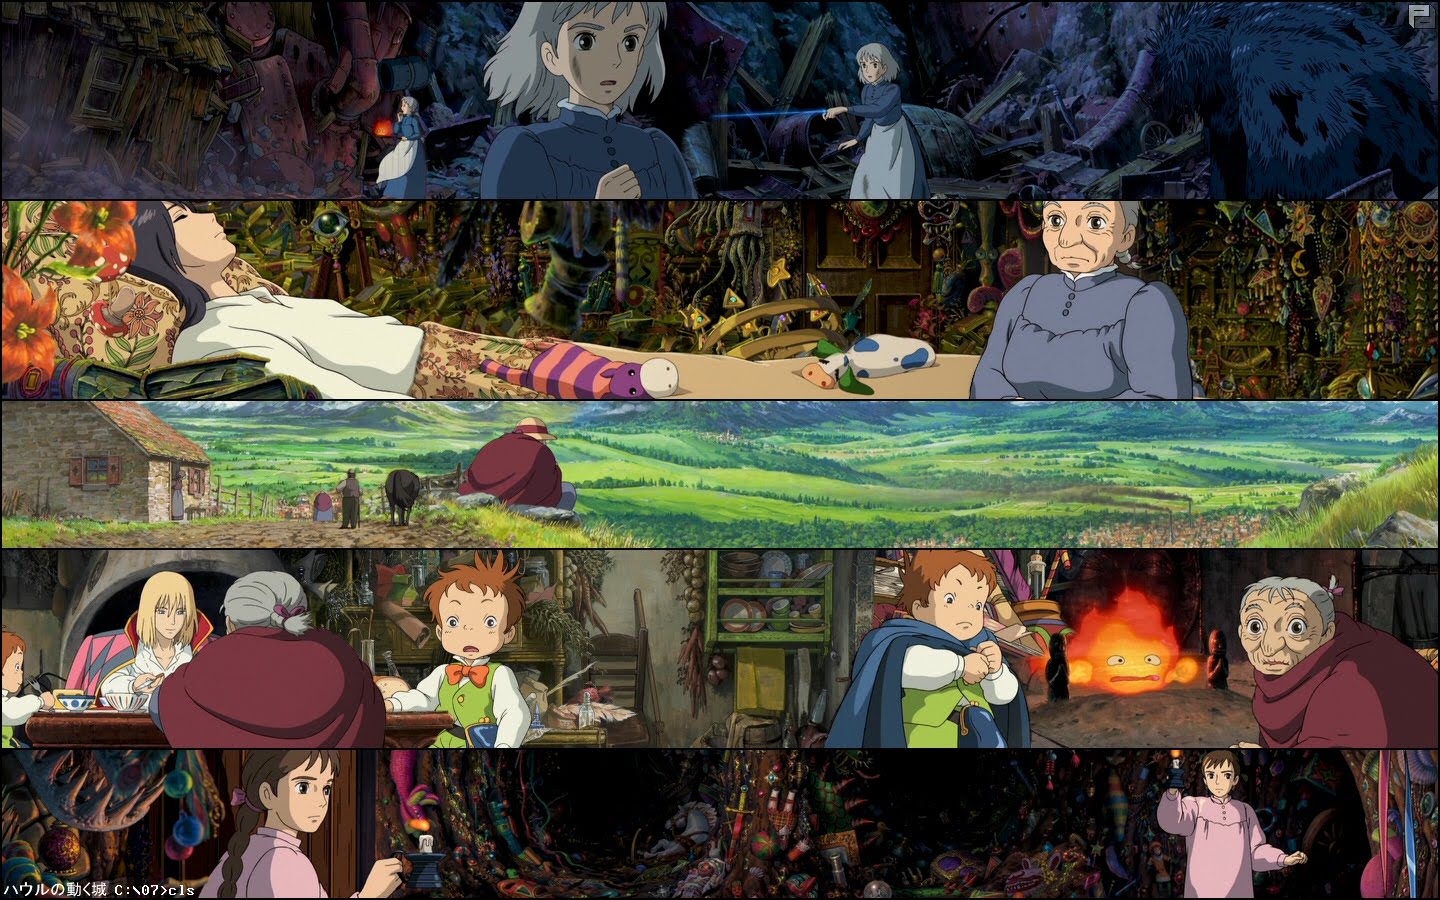 [HowlsMovingCastle_by_cls.jpg]